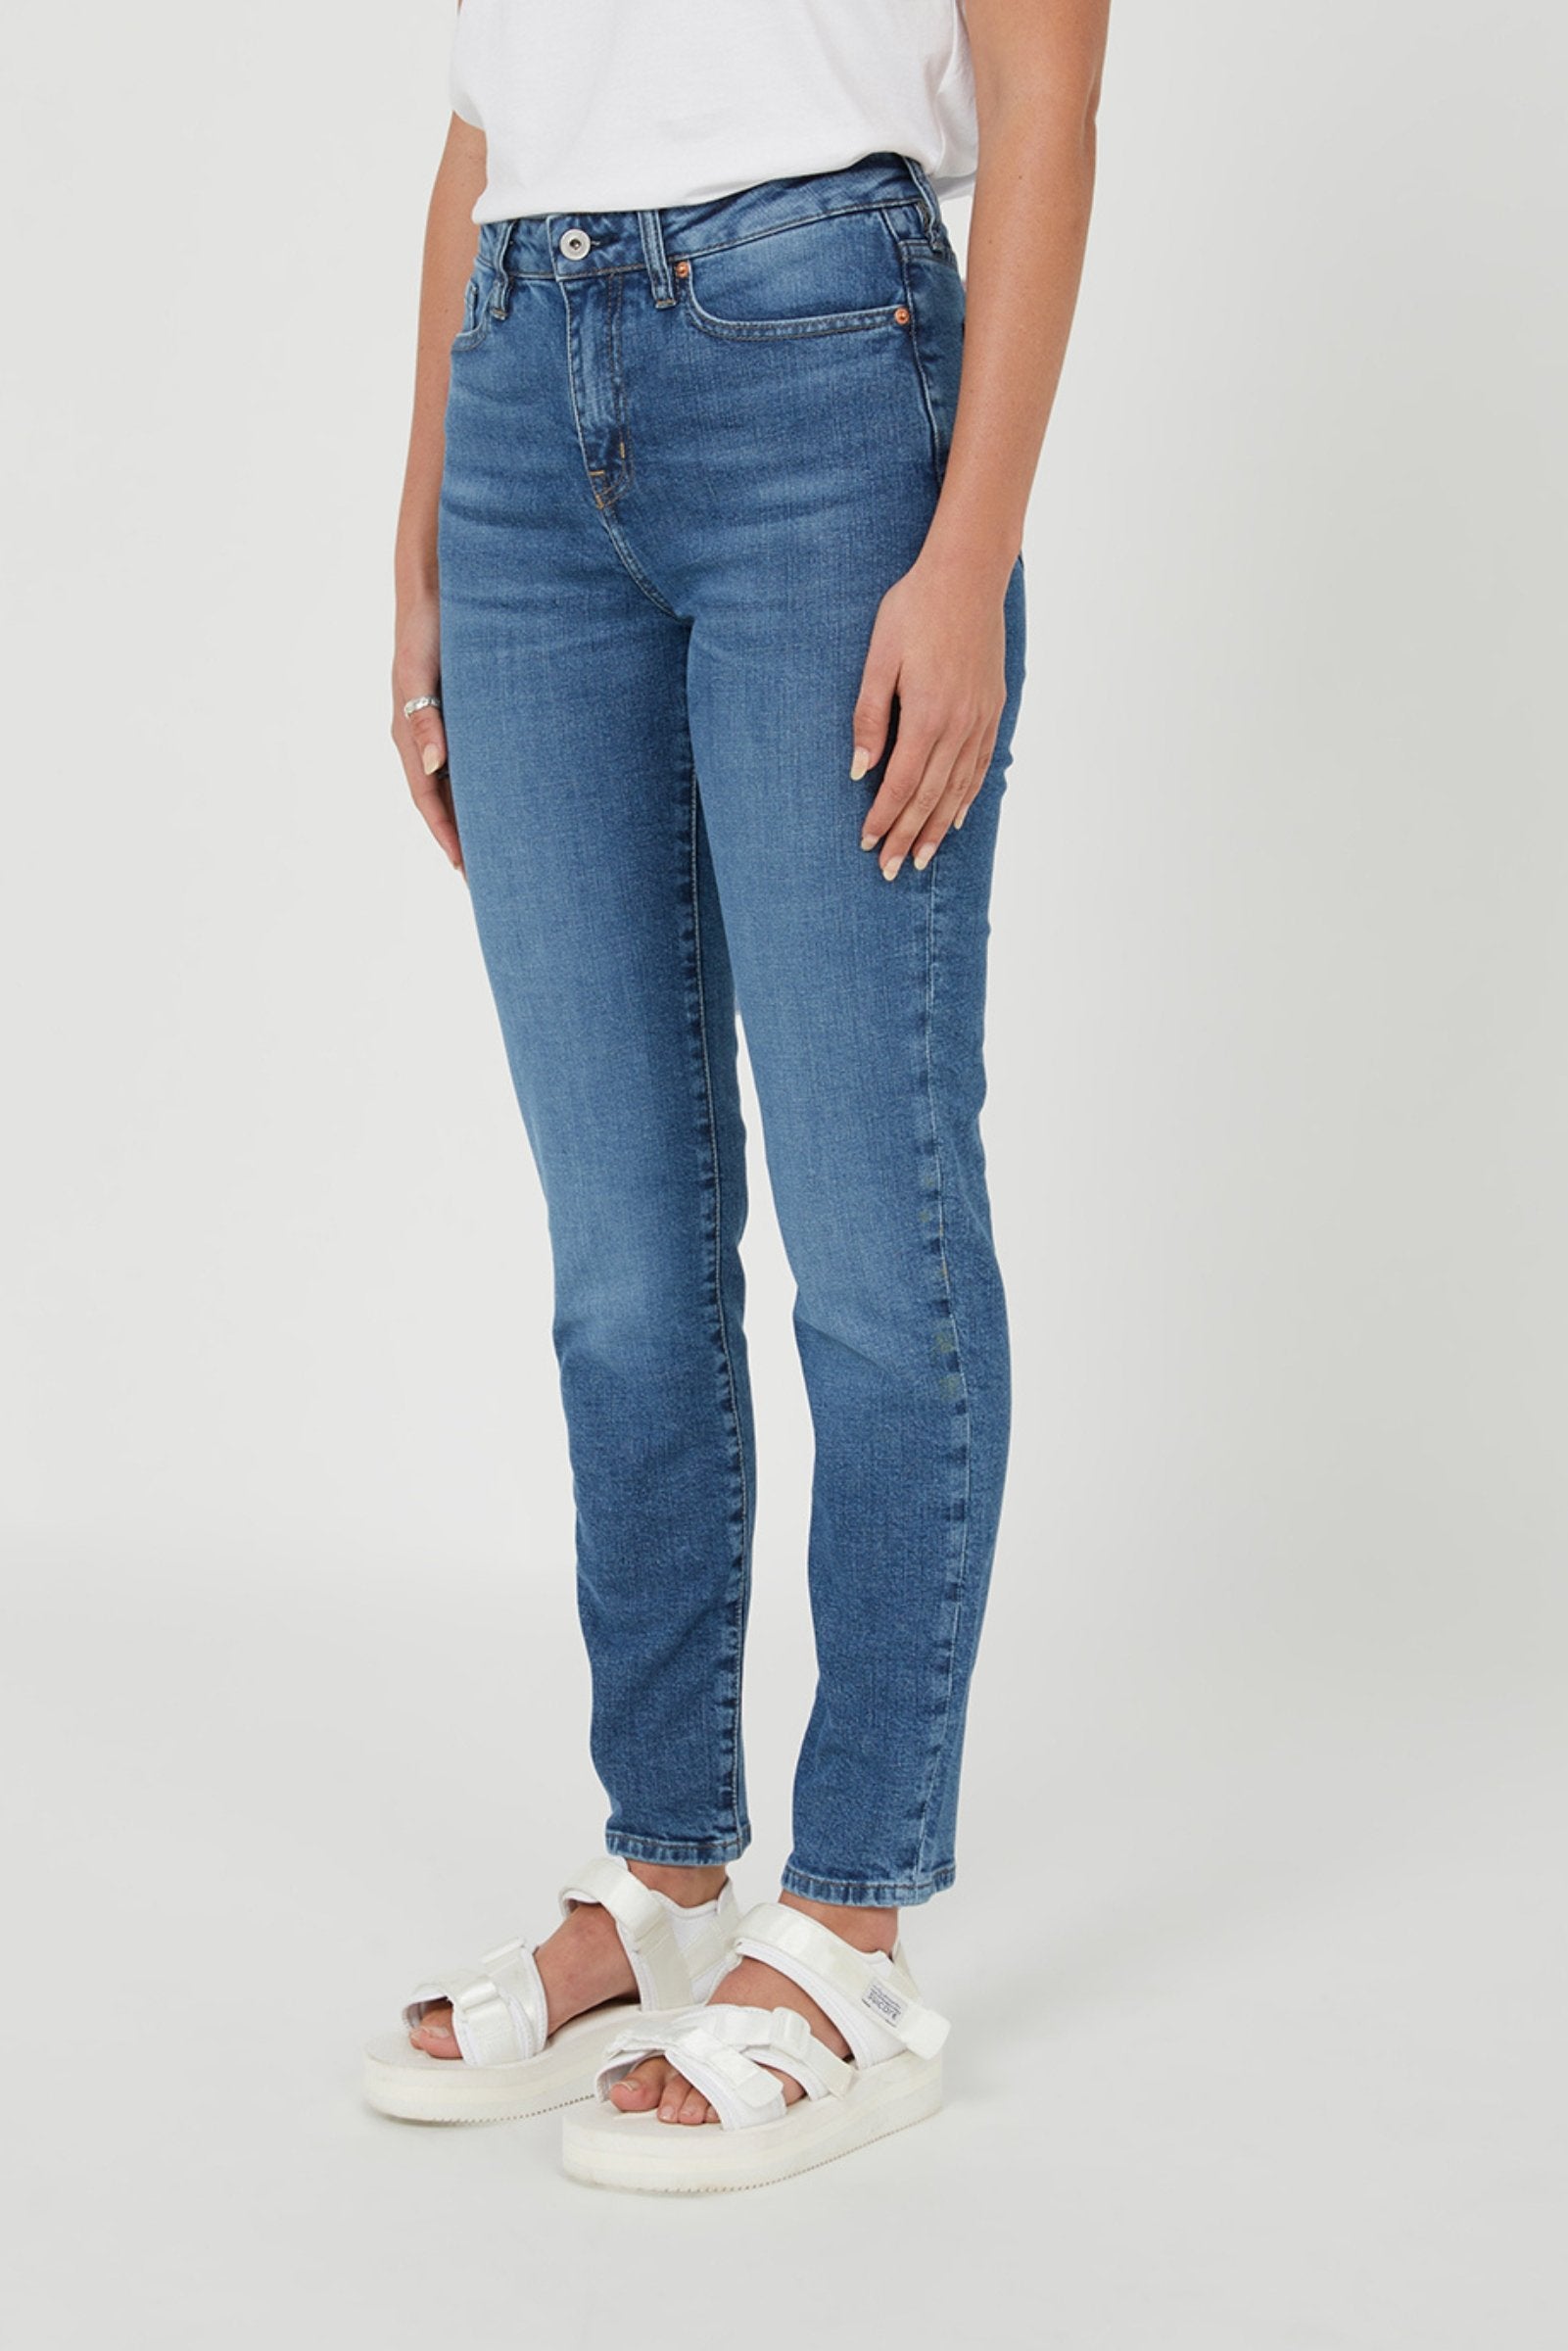 Outland Lucy Jeans - New Blue - Outland - Coko